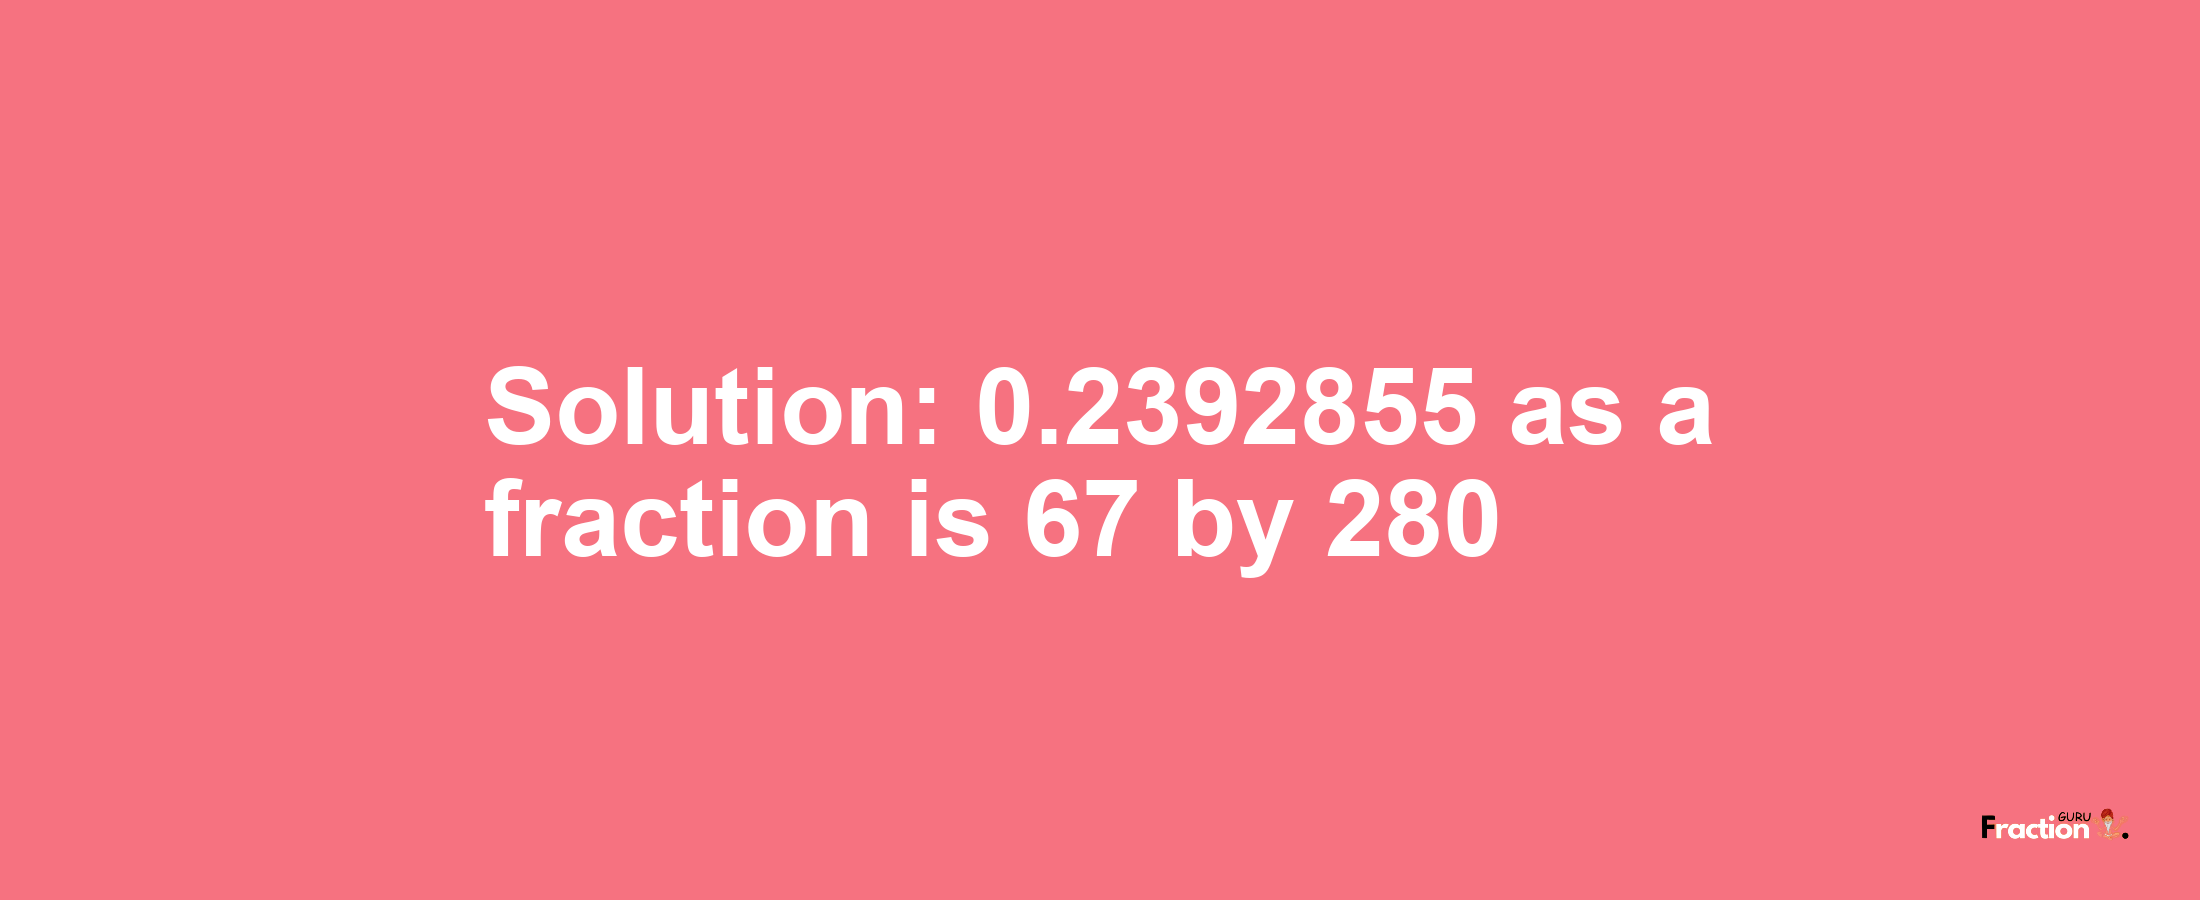 Solution:0.2392855 as a fraction is 67/280